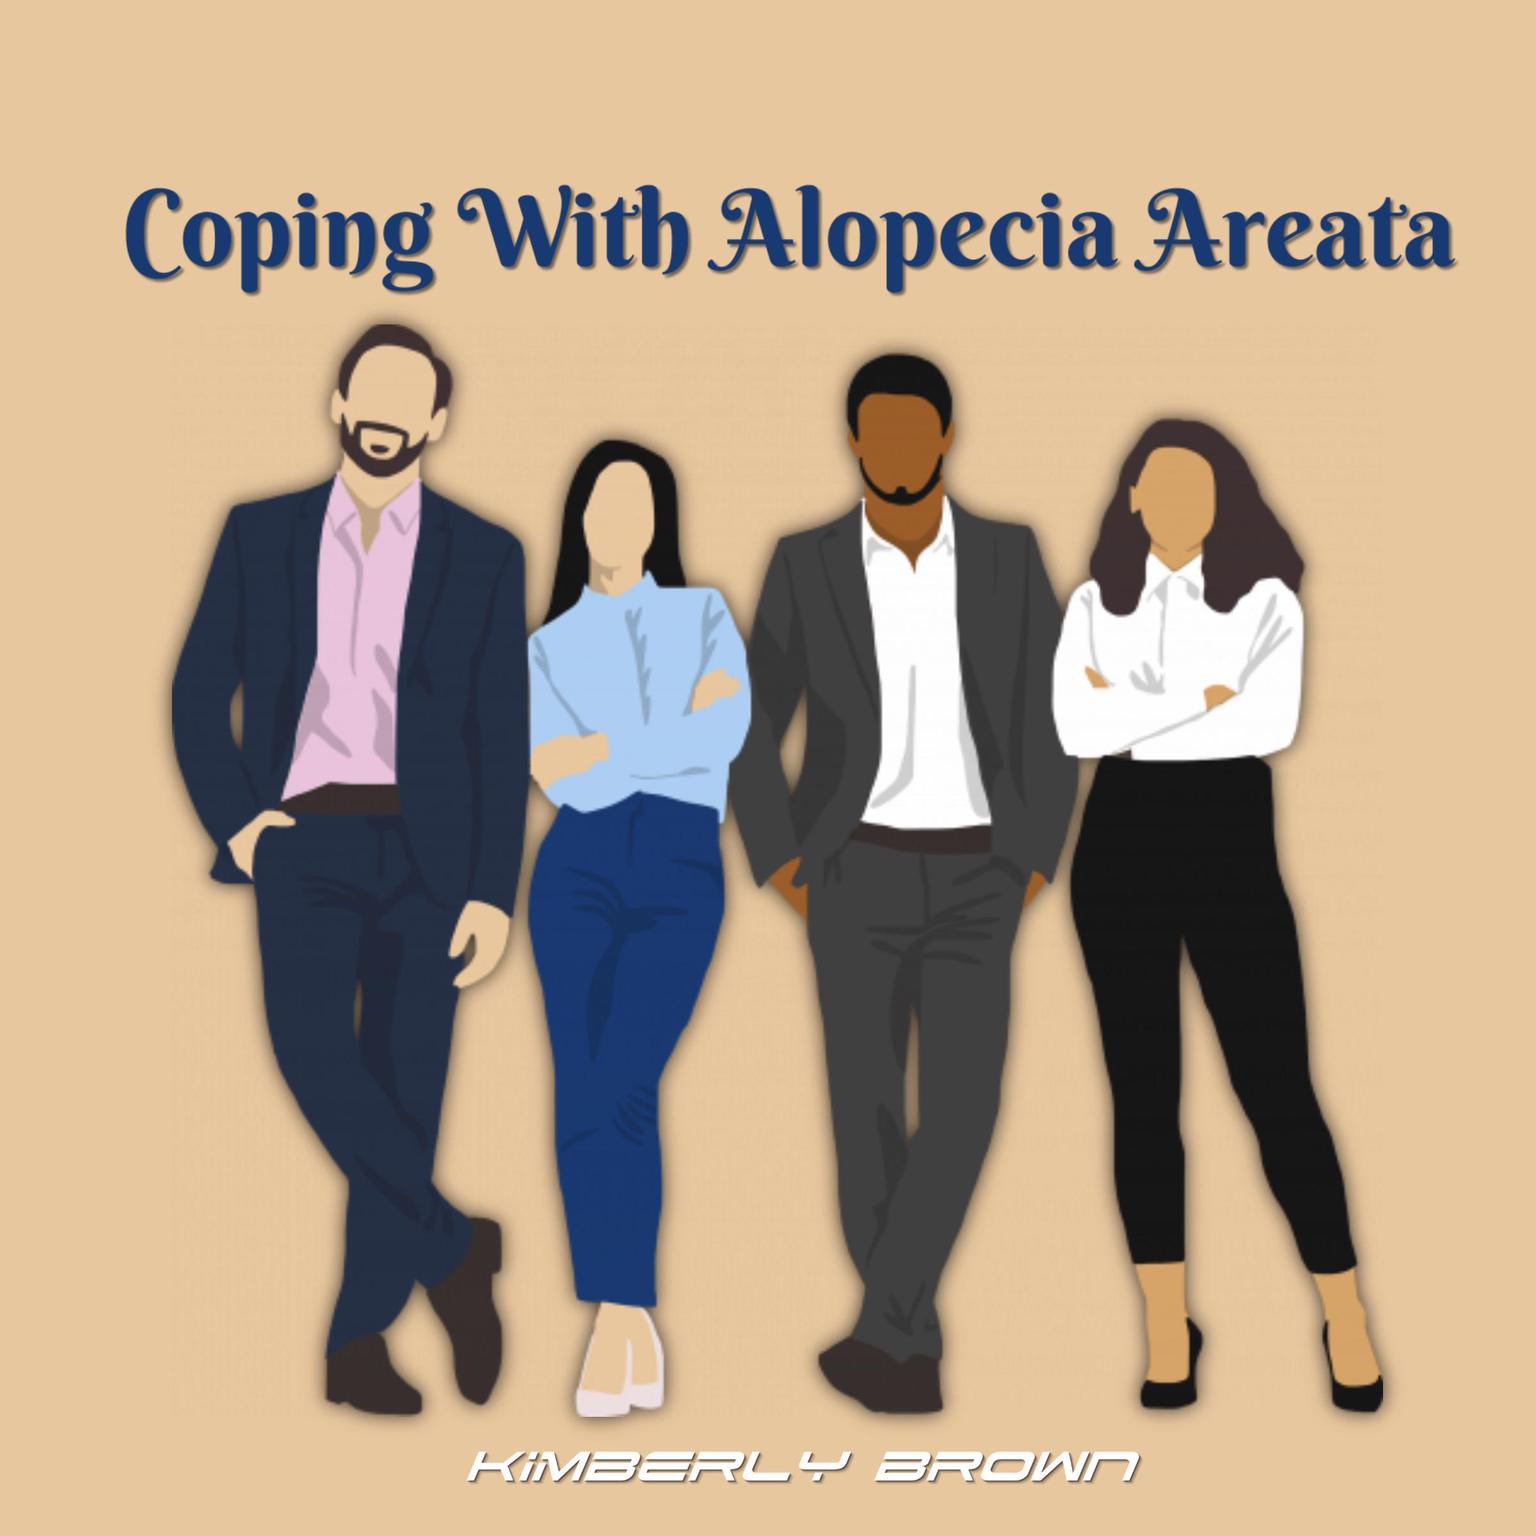 Coping With Alopecia Areata Audiobook, by Kimberly Brown